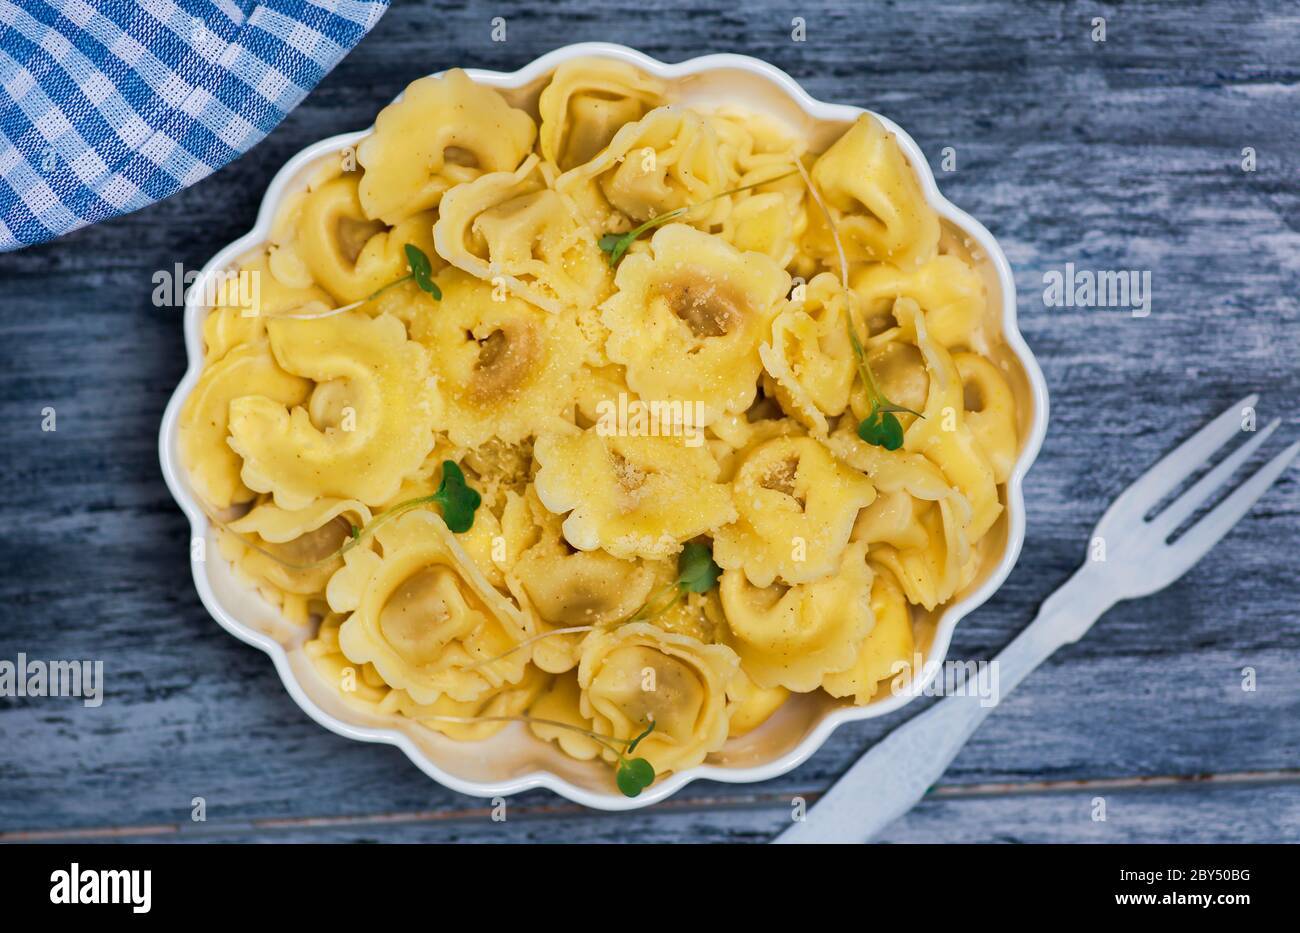 Tortellini Italian stuffed pasta on a plate with cheese and vegetables Stock Photo